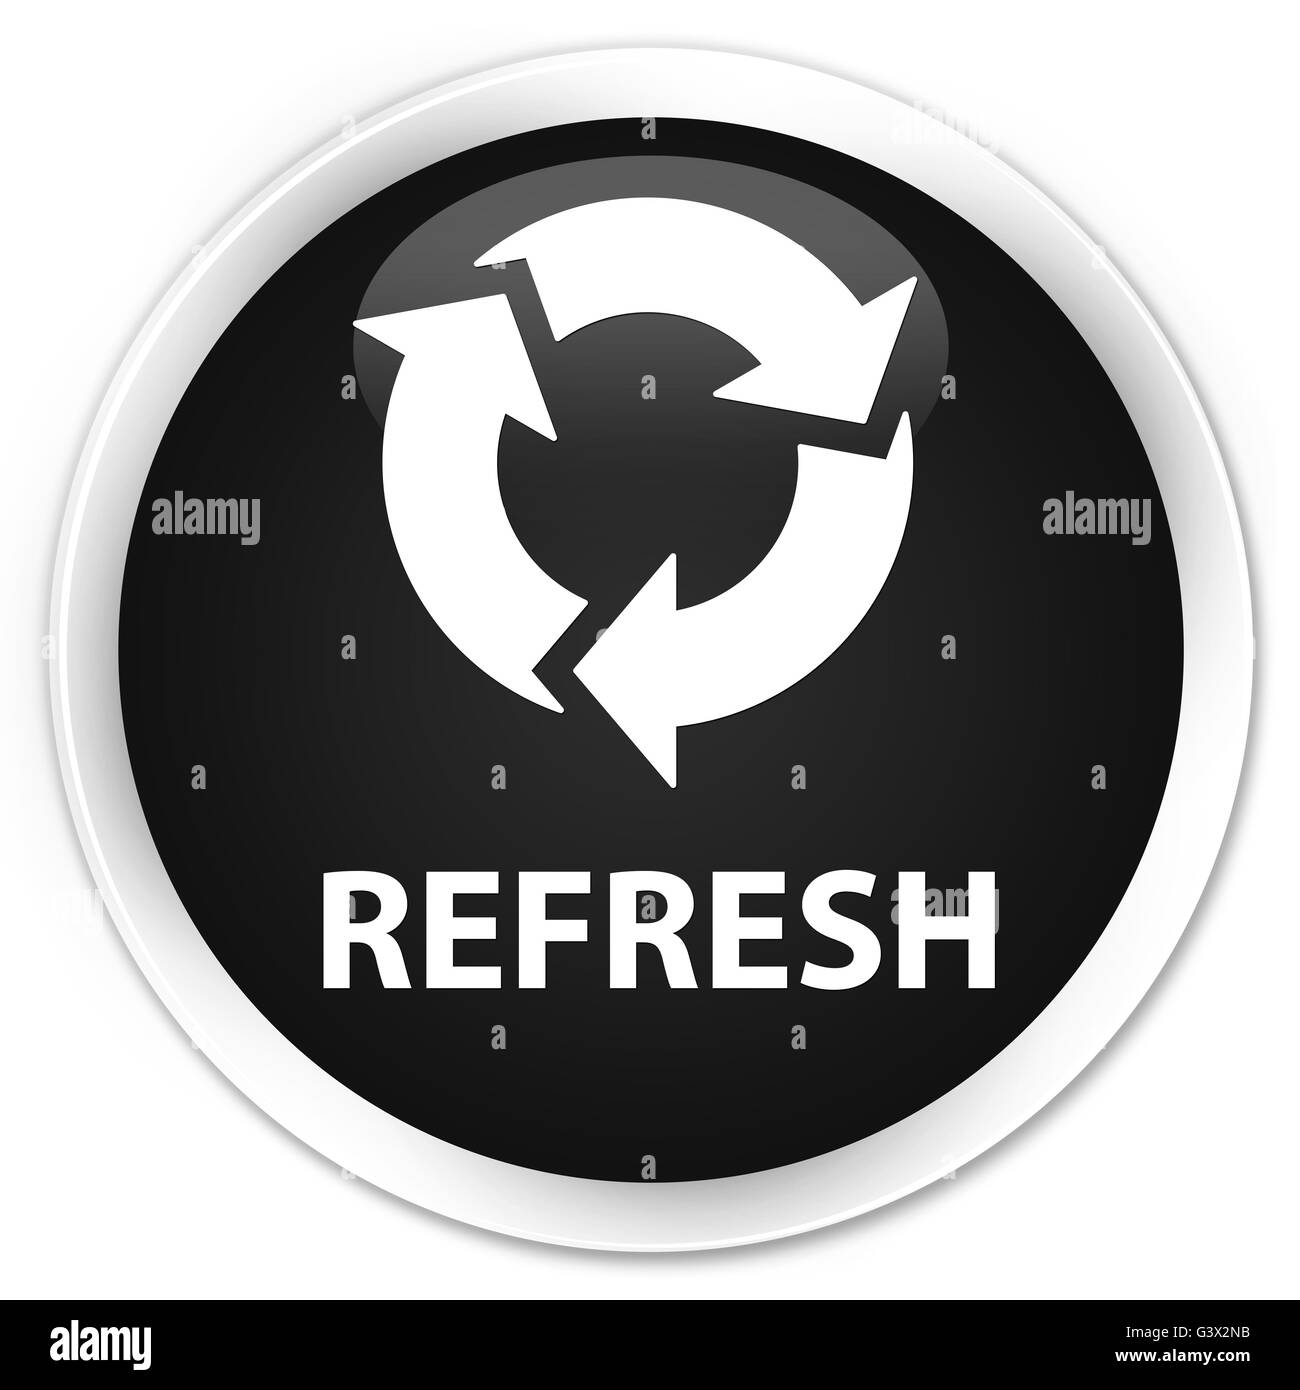 Refresh isolated on premium black round button abstract illustration Stock Photo